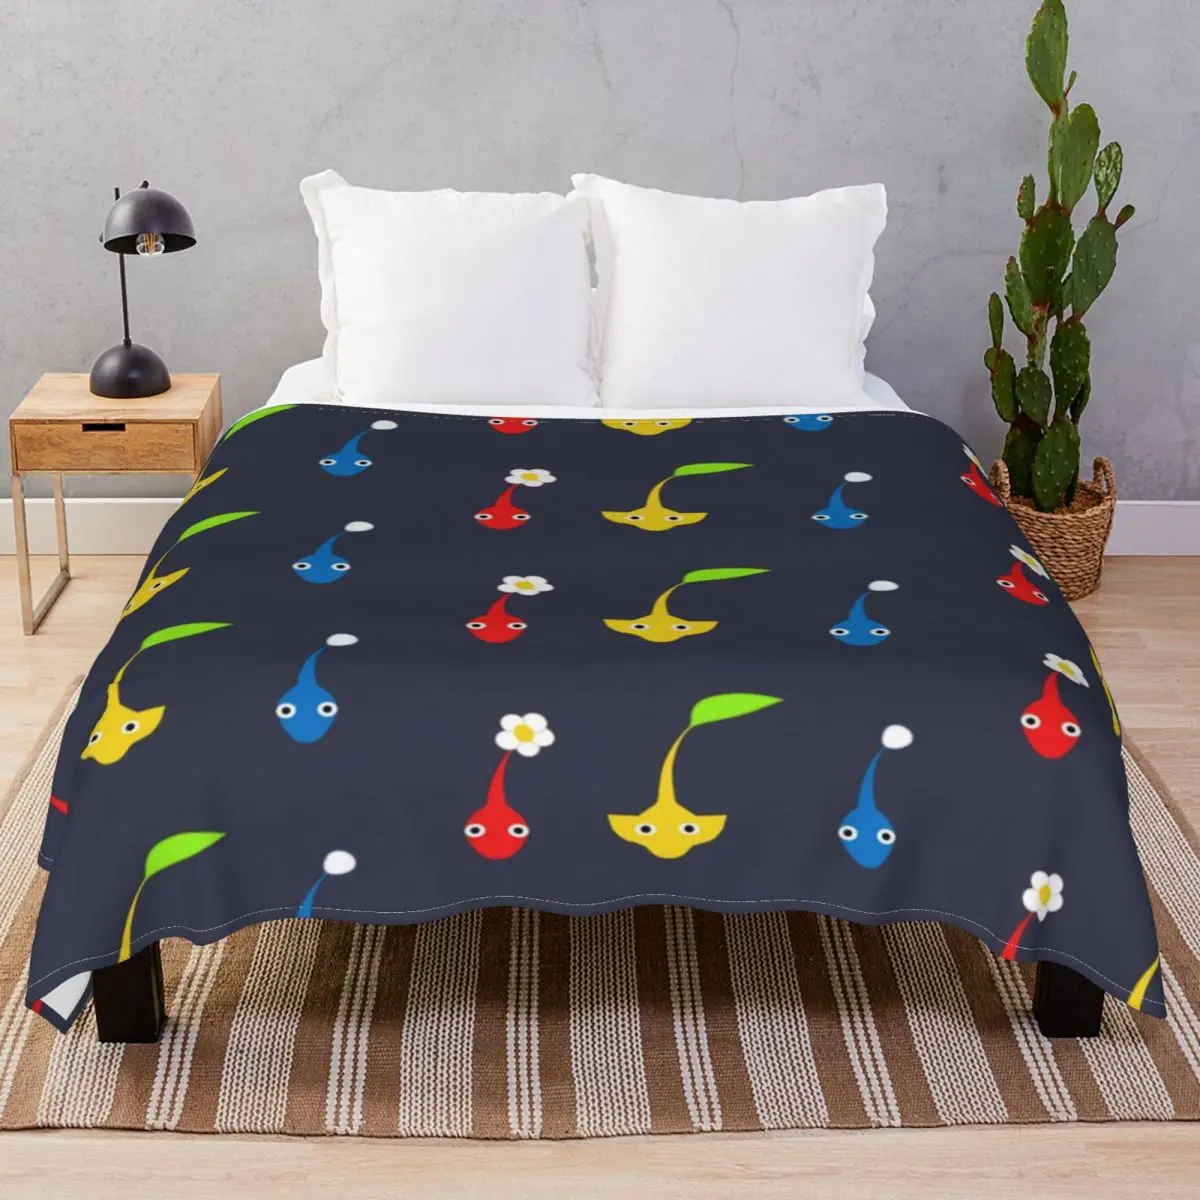 Pikmin Characters Blankets Fleece Autumn/Winter Multifunction Throw Blanket for Bed Home Couch Travel Cinema